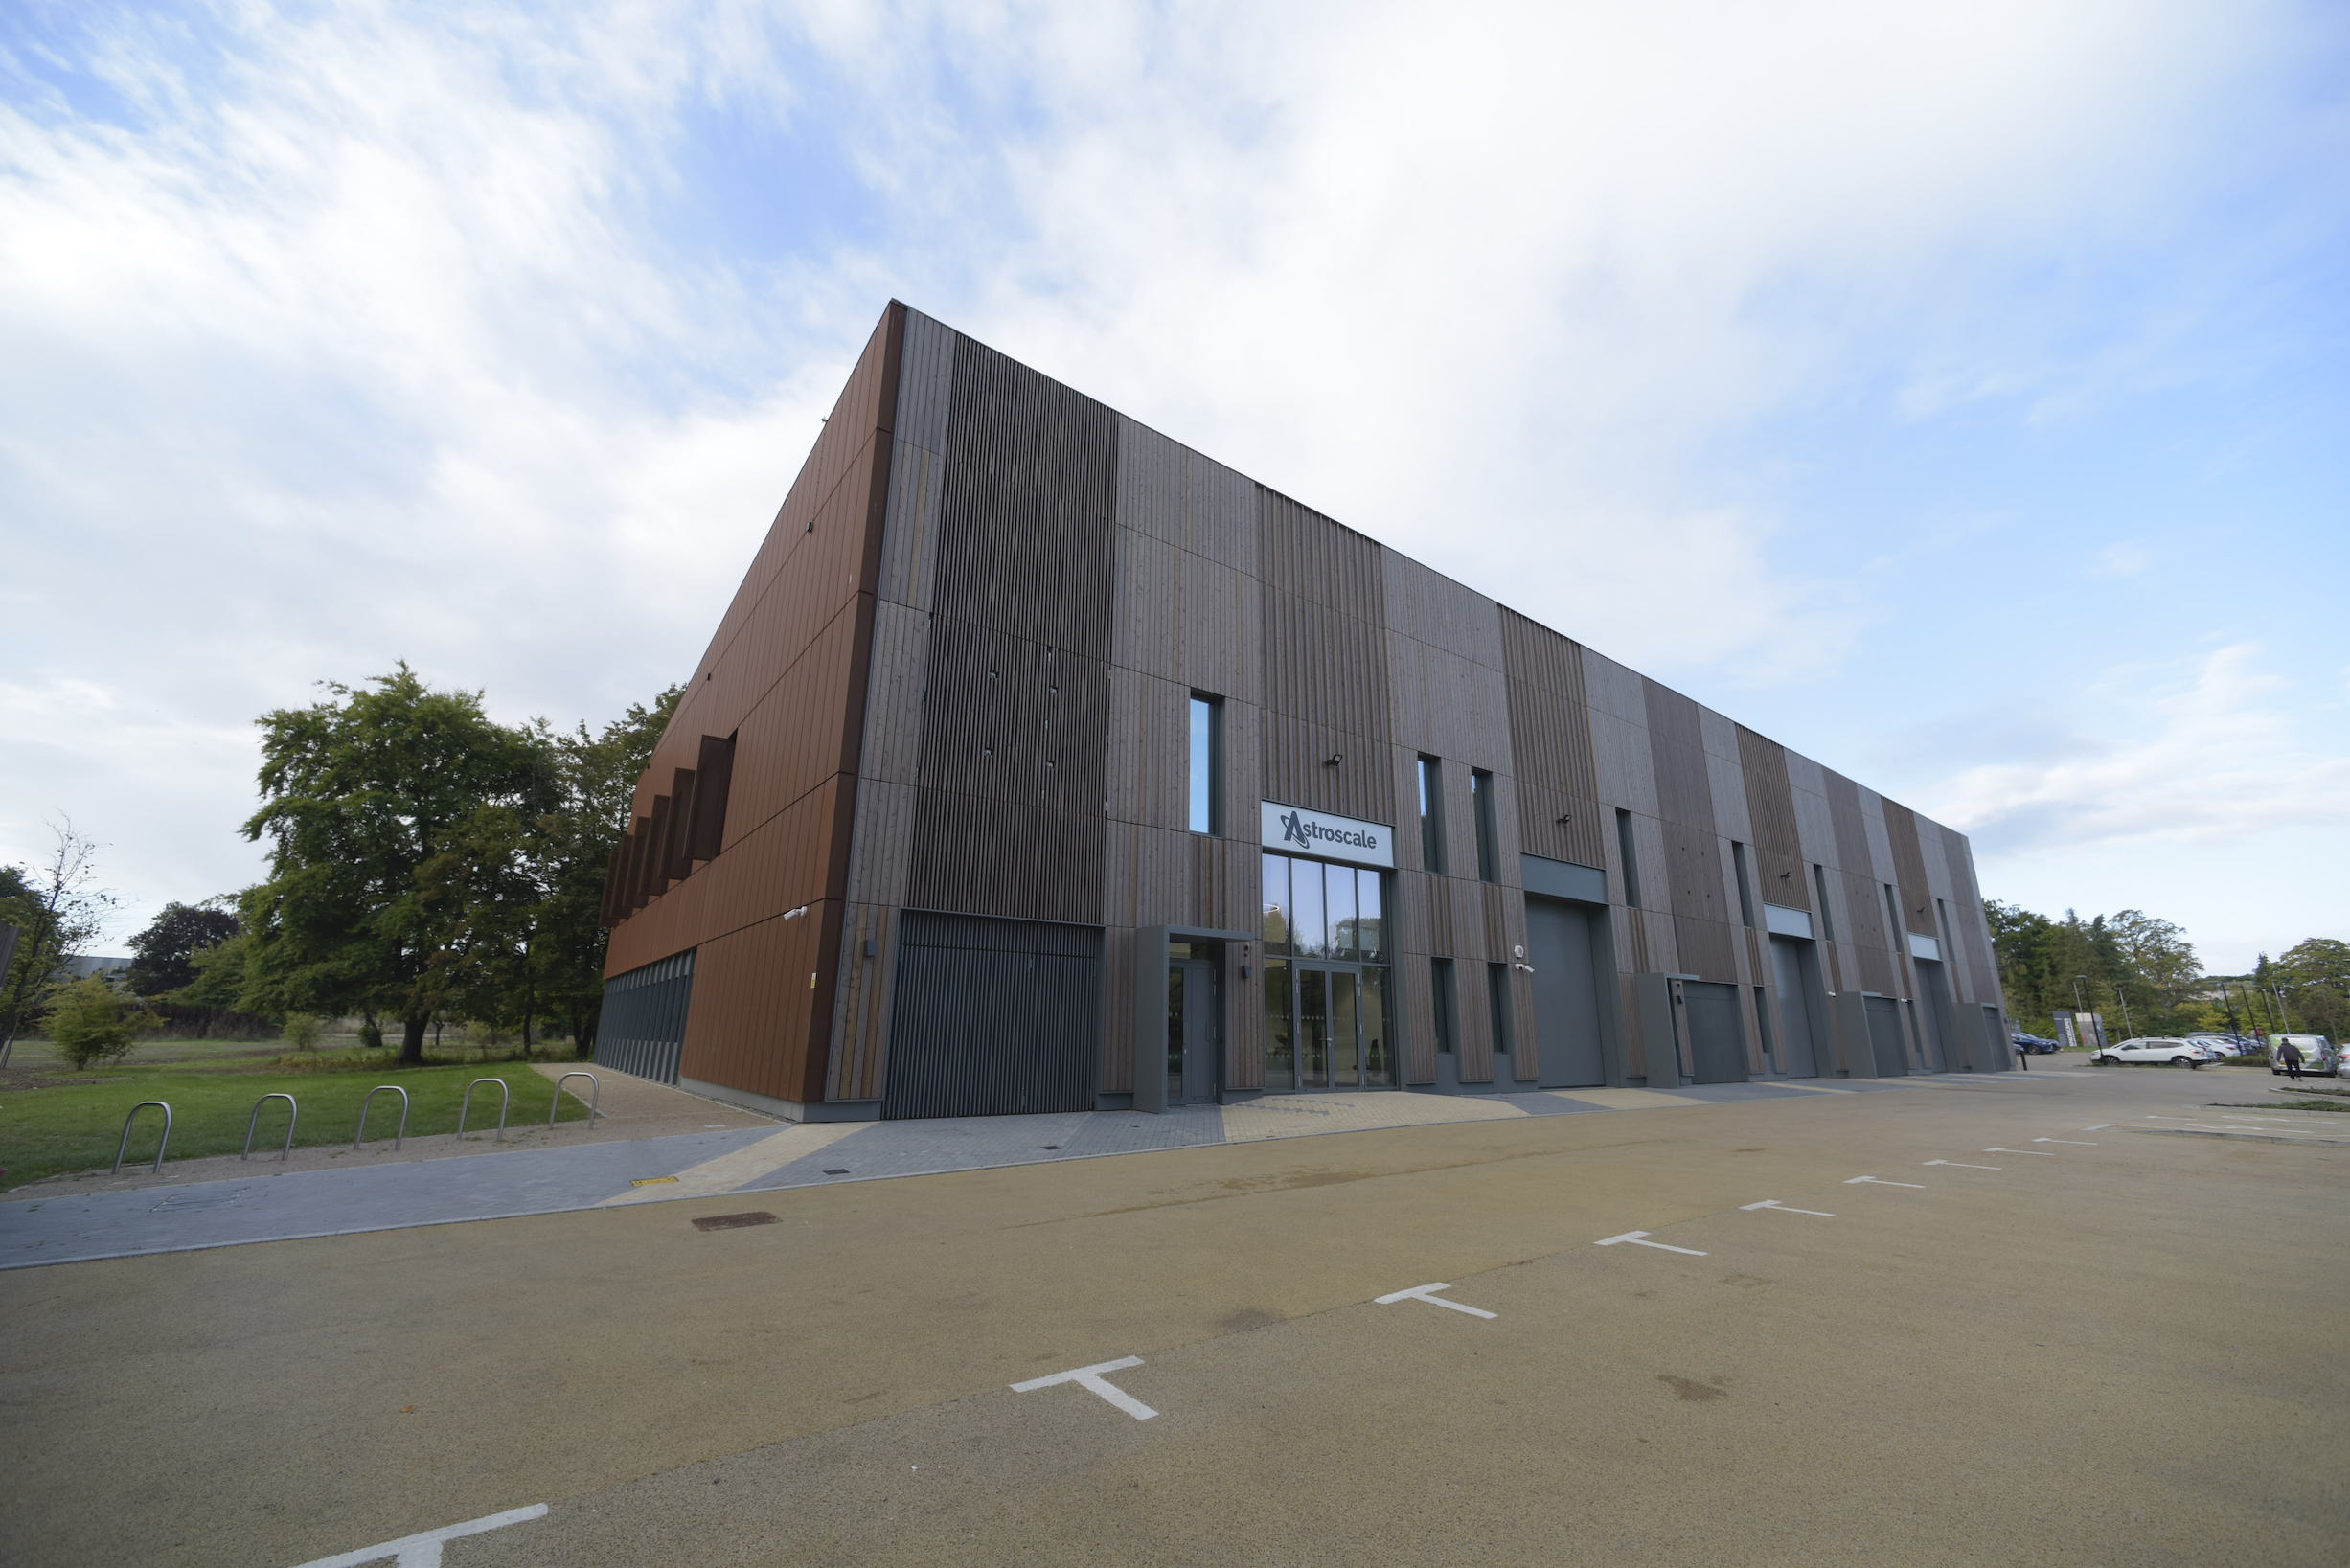 Astroscale’s new U.K. facility Zeus on Harwell Science & Innovation Campus. 